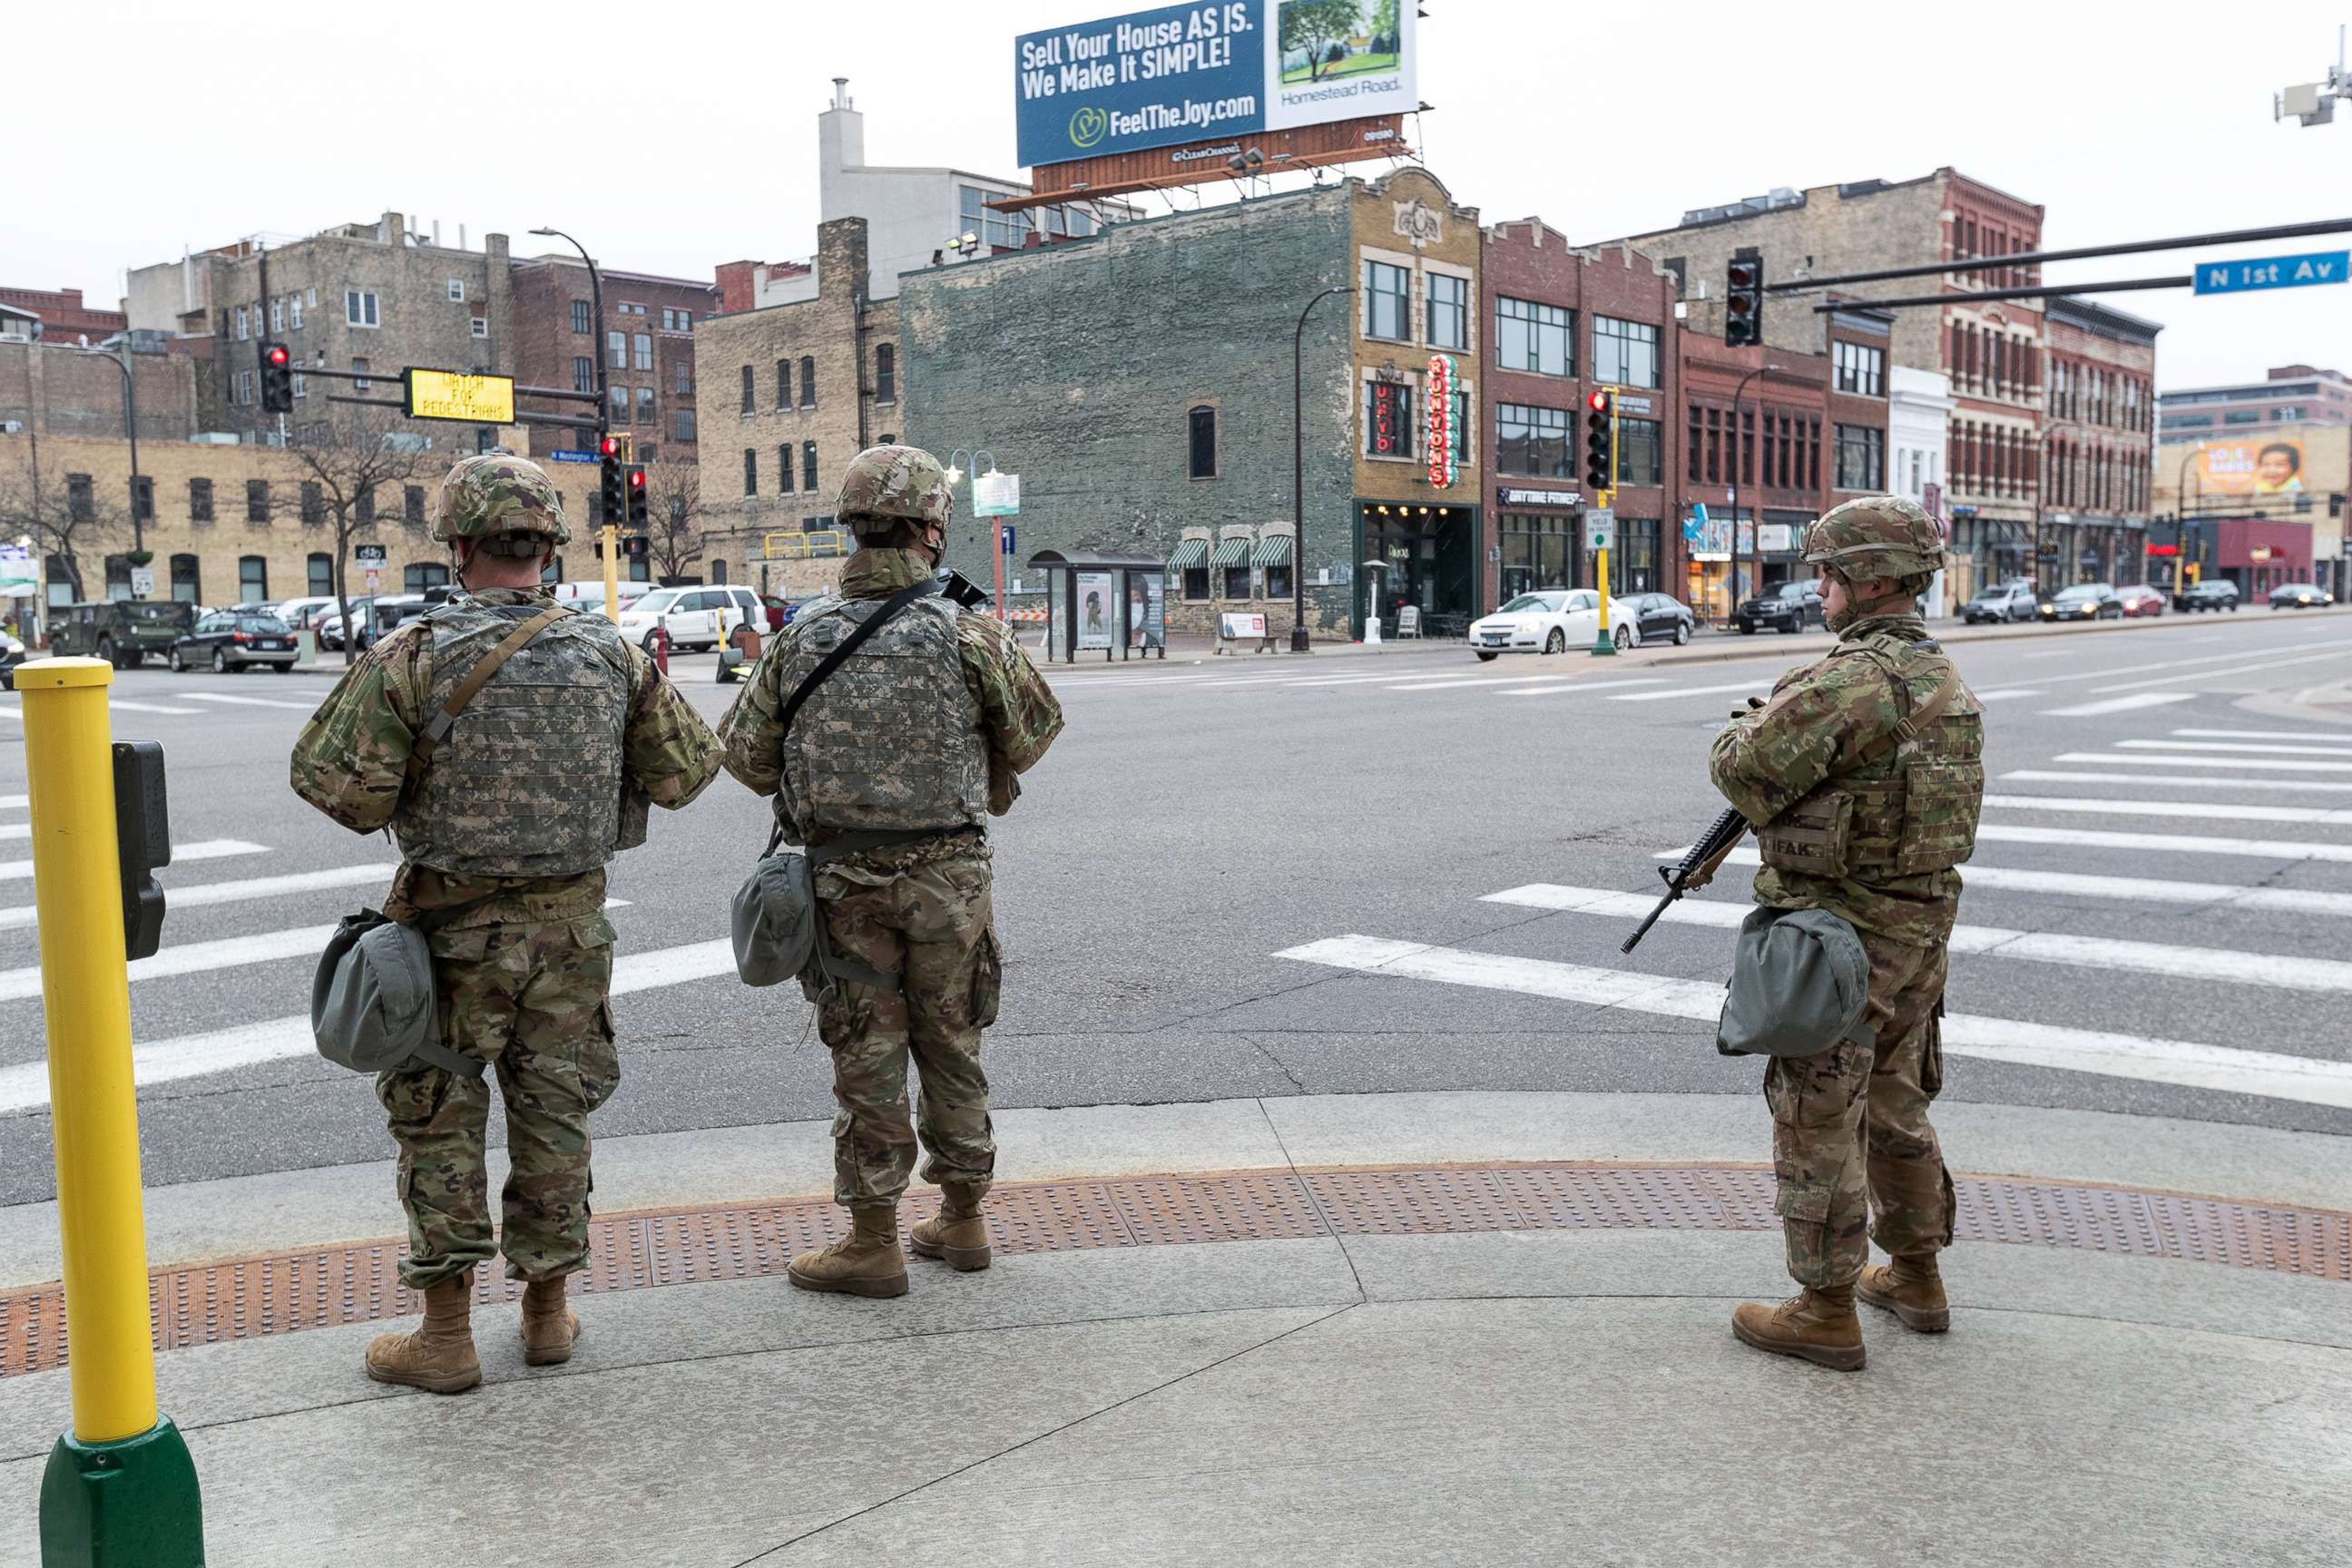 PHOTO: Members of the National Guard on duty in Minneapolis, April 18, 2021, ahead of the verdict in the Derek Chauvin trial.